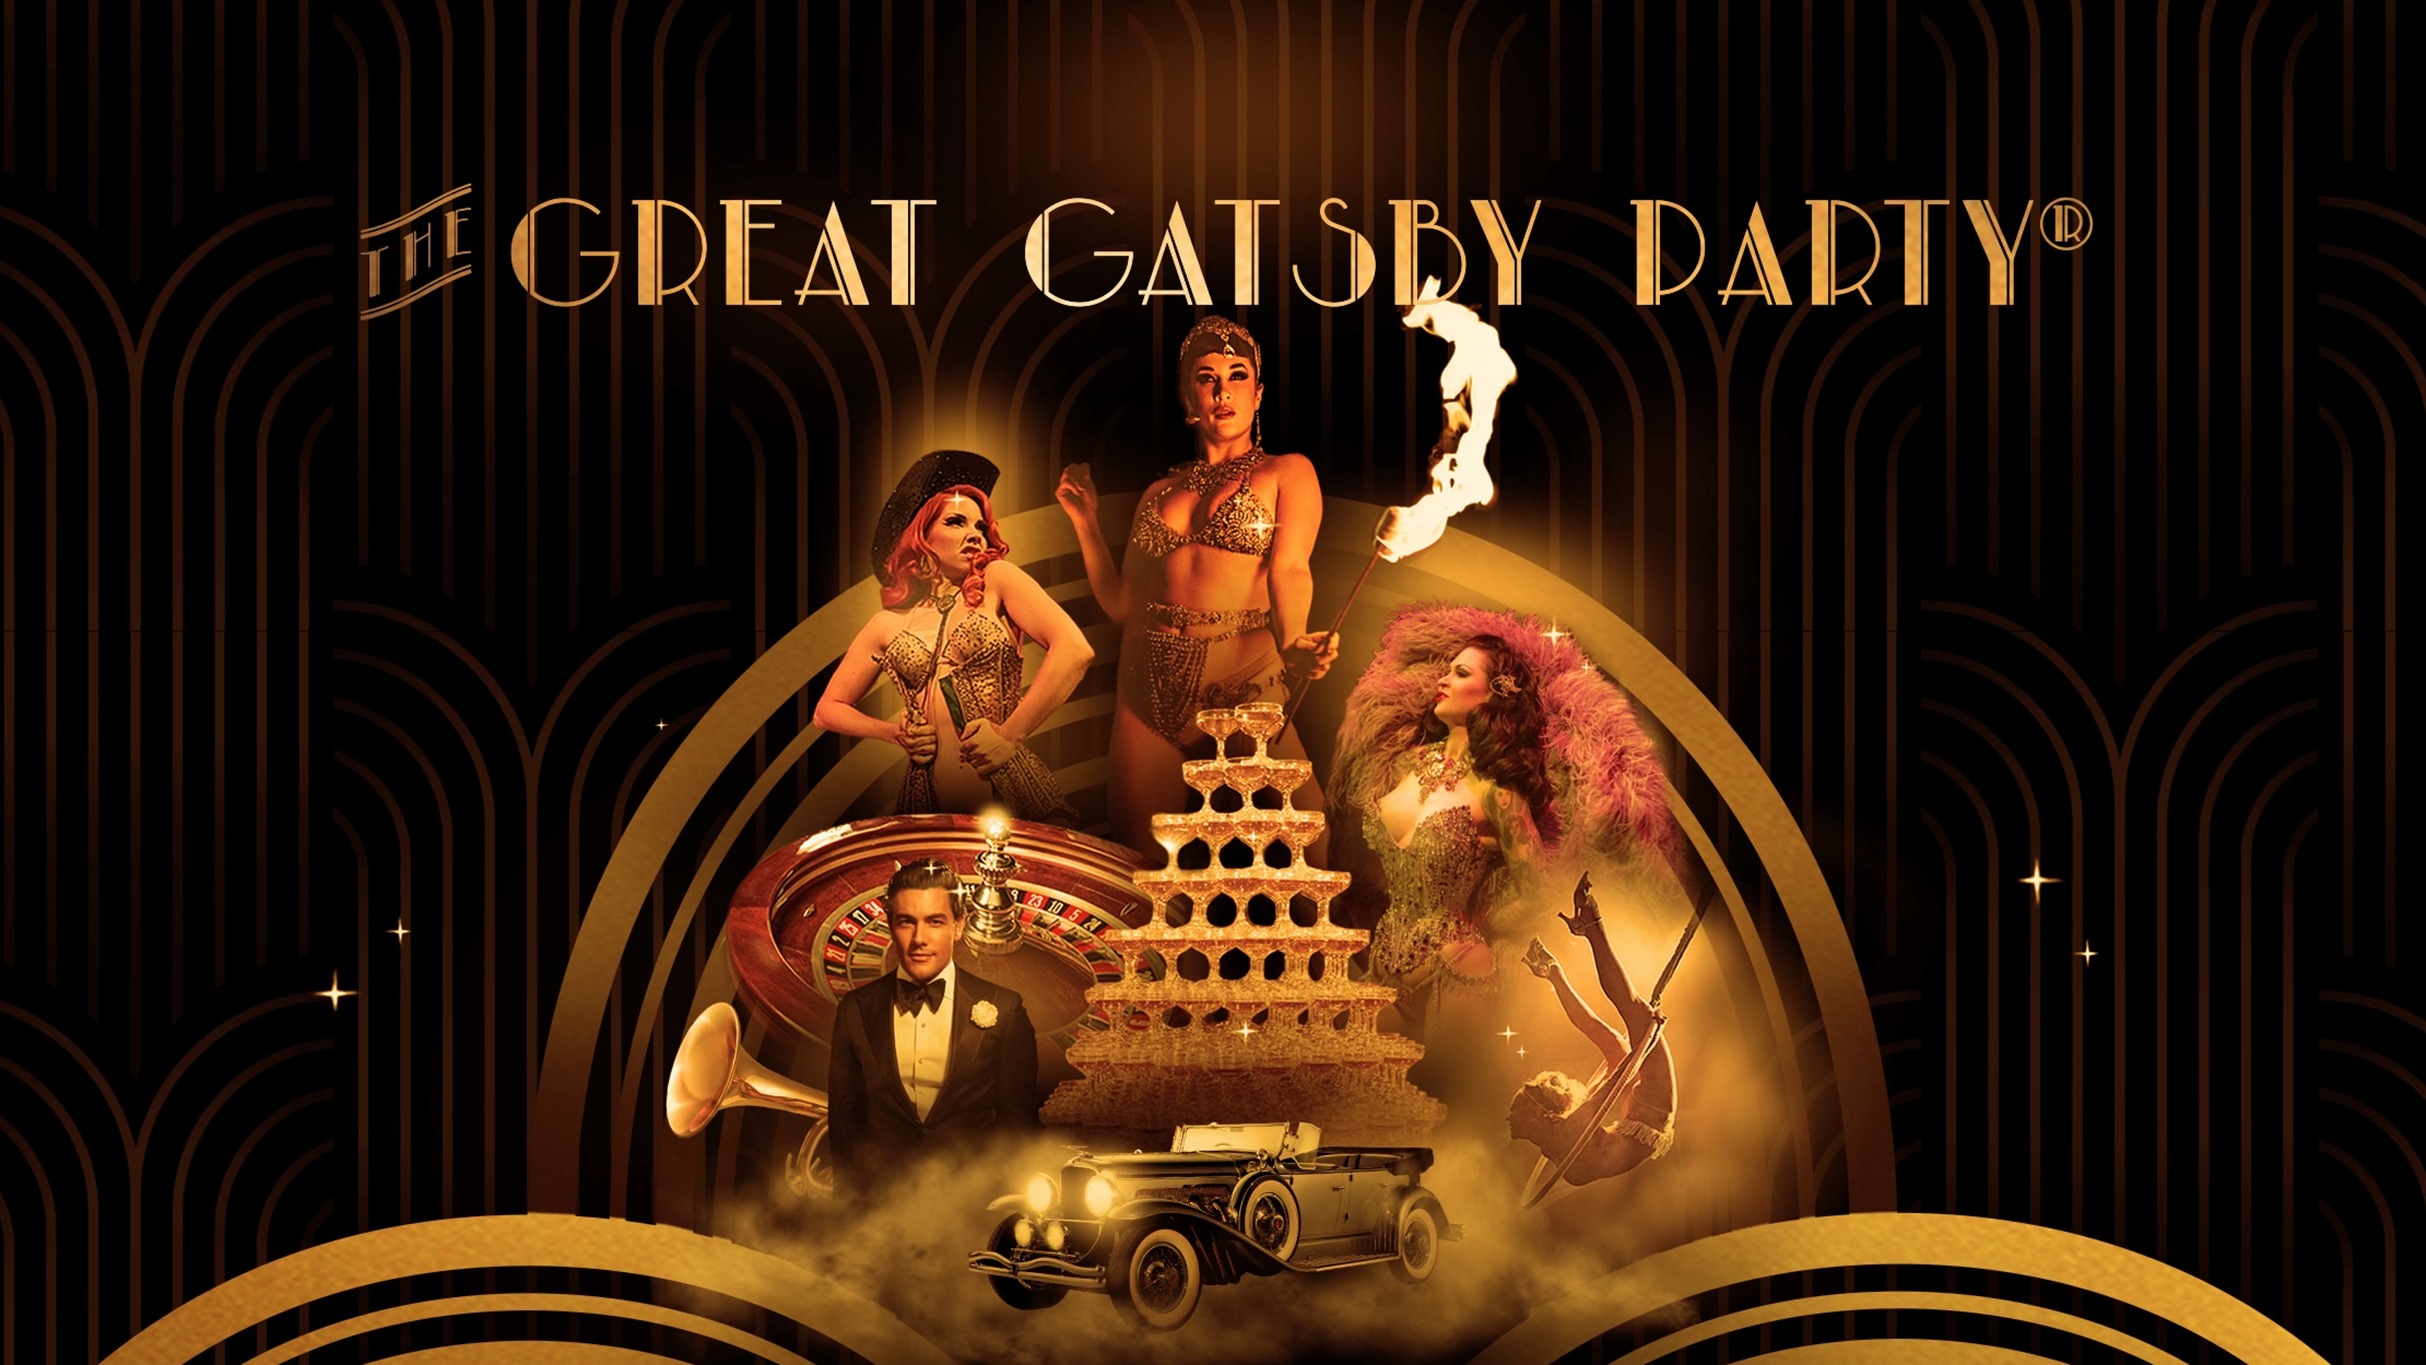 The Great Gatsby Party - Dallas